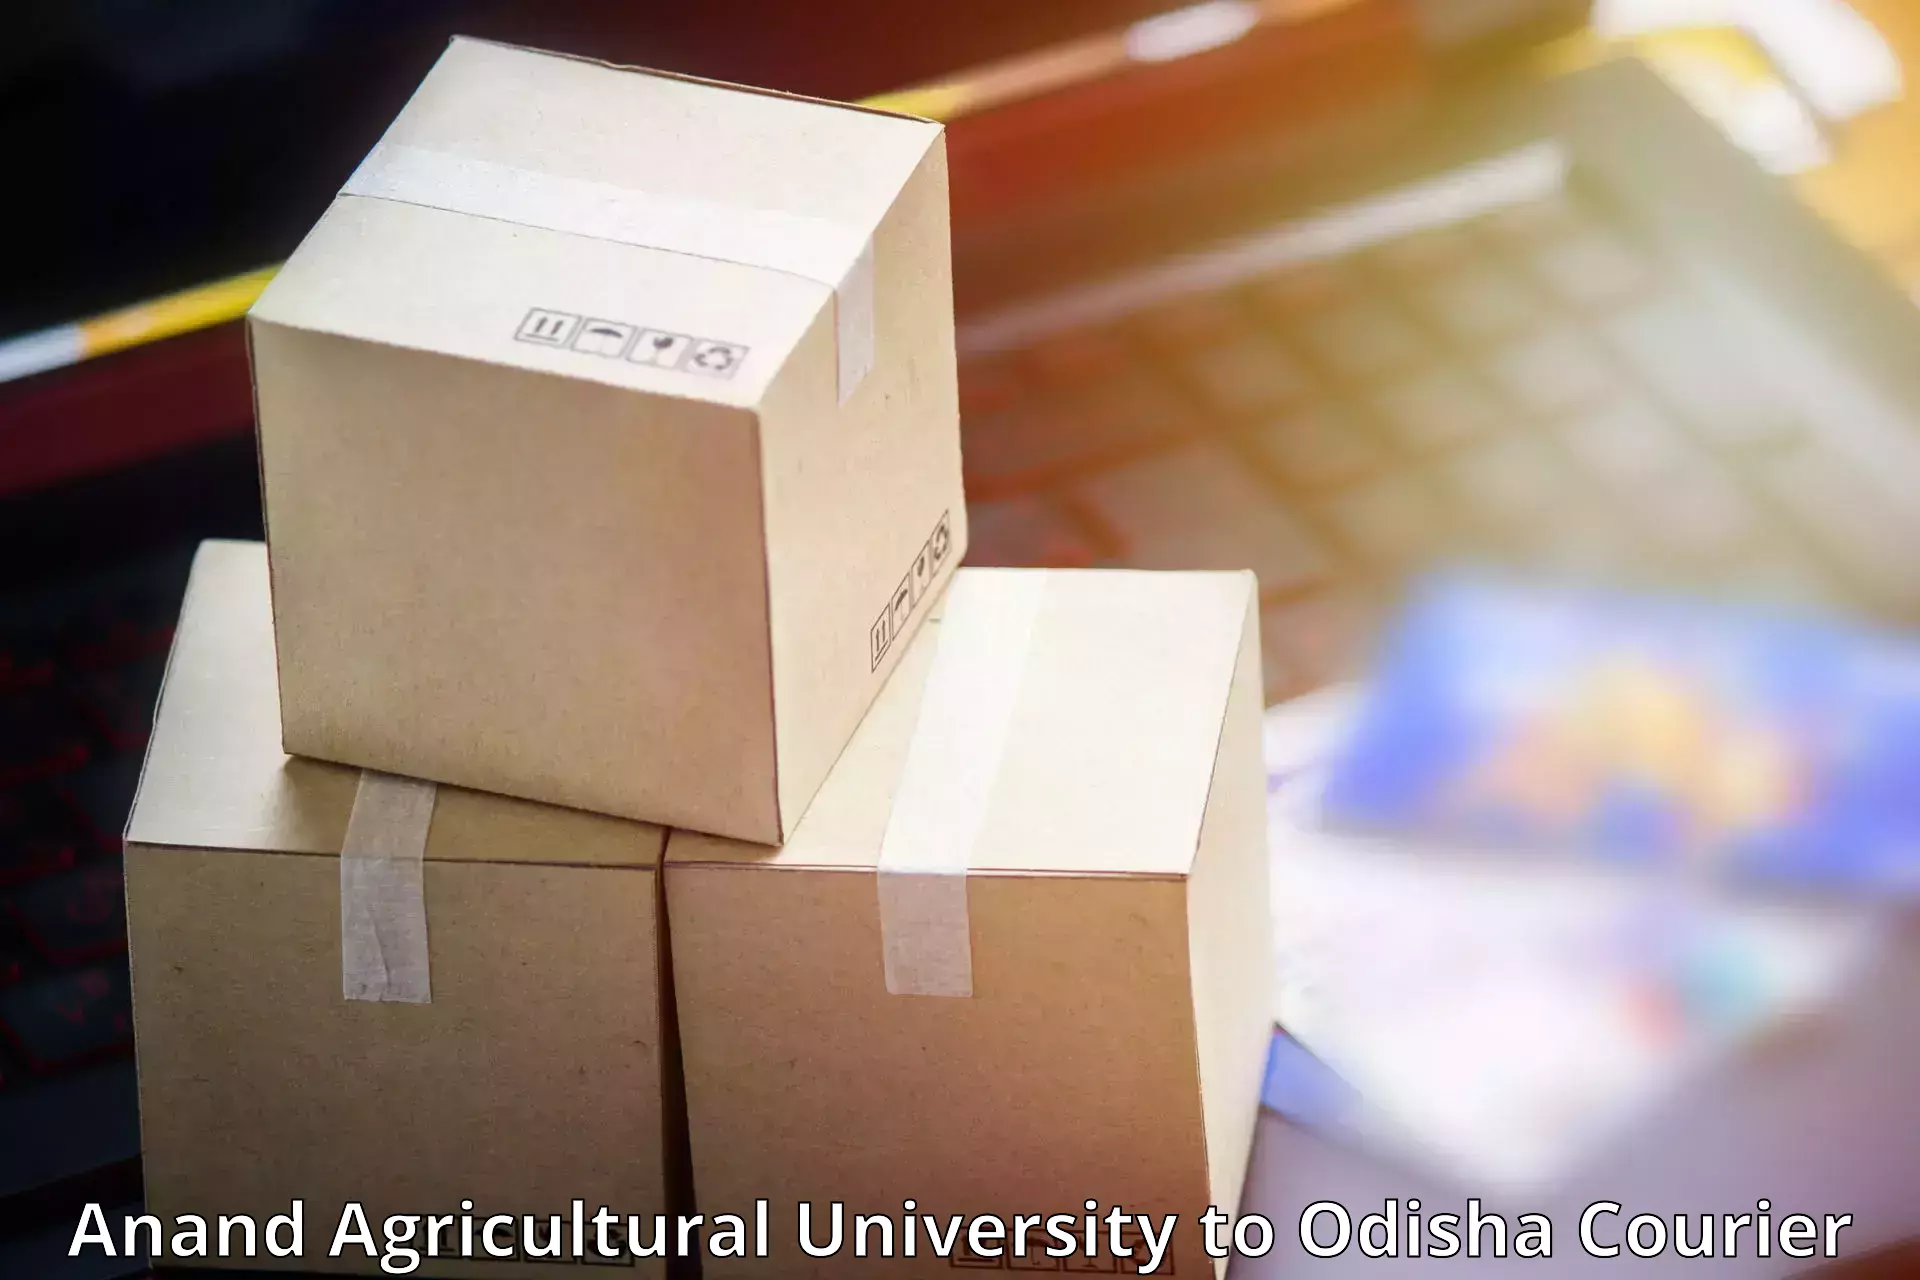 Online shipping calculator in Anand Agricultural University to Gunupur